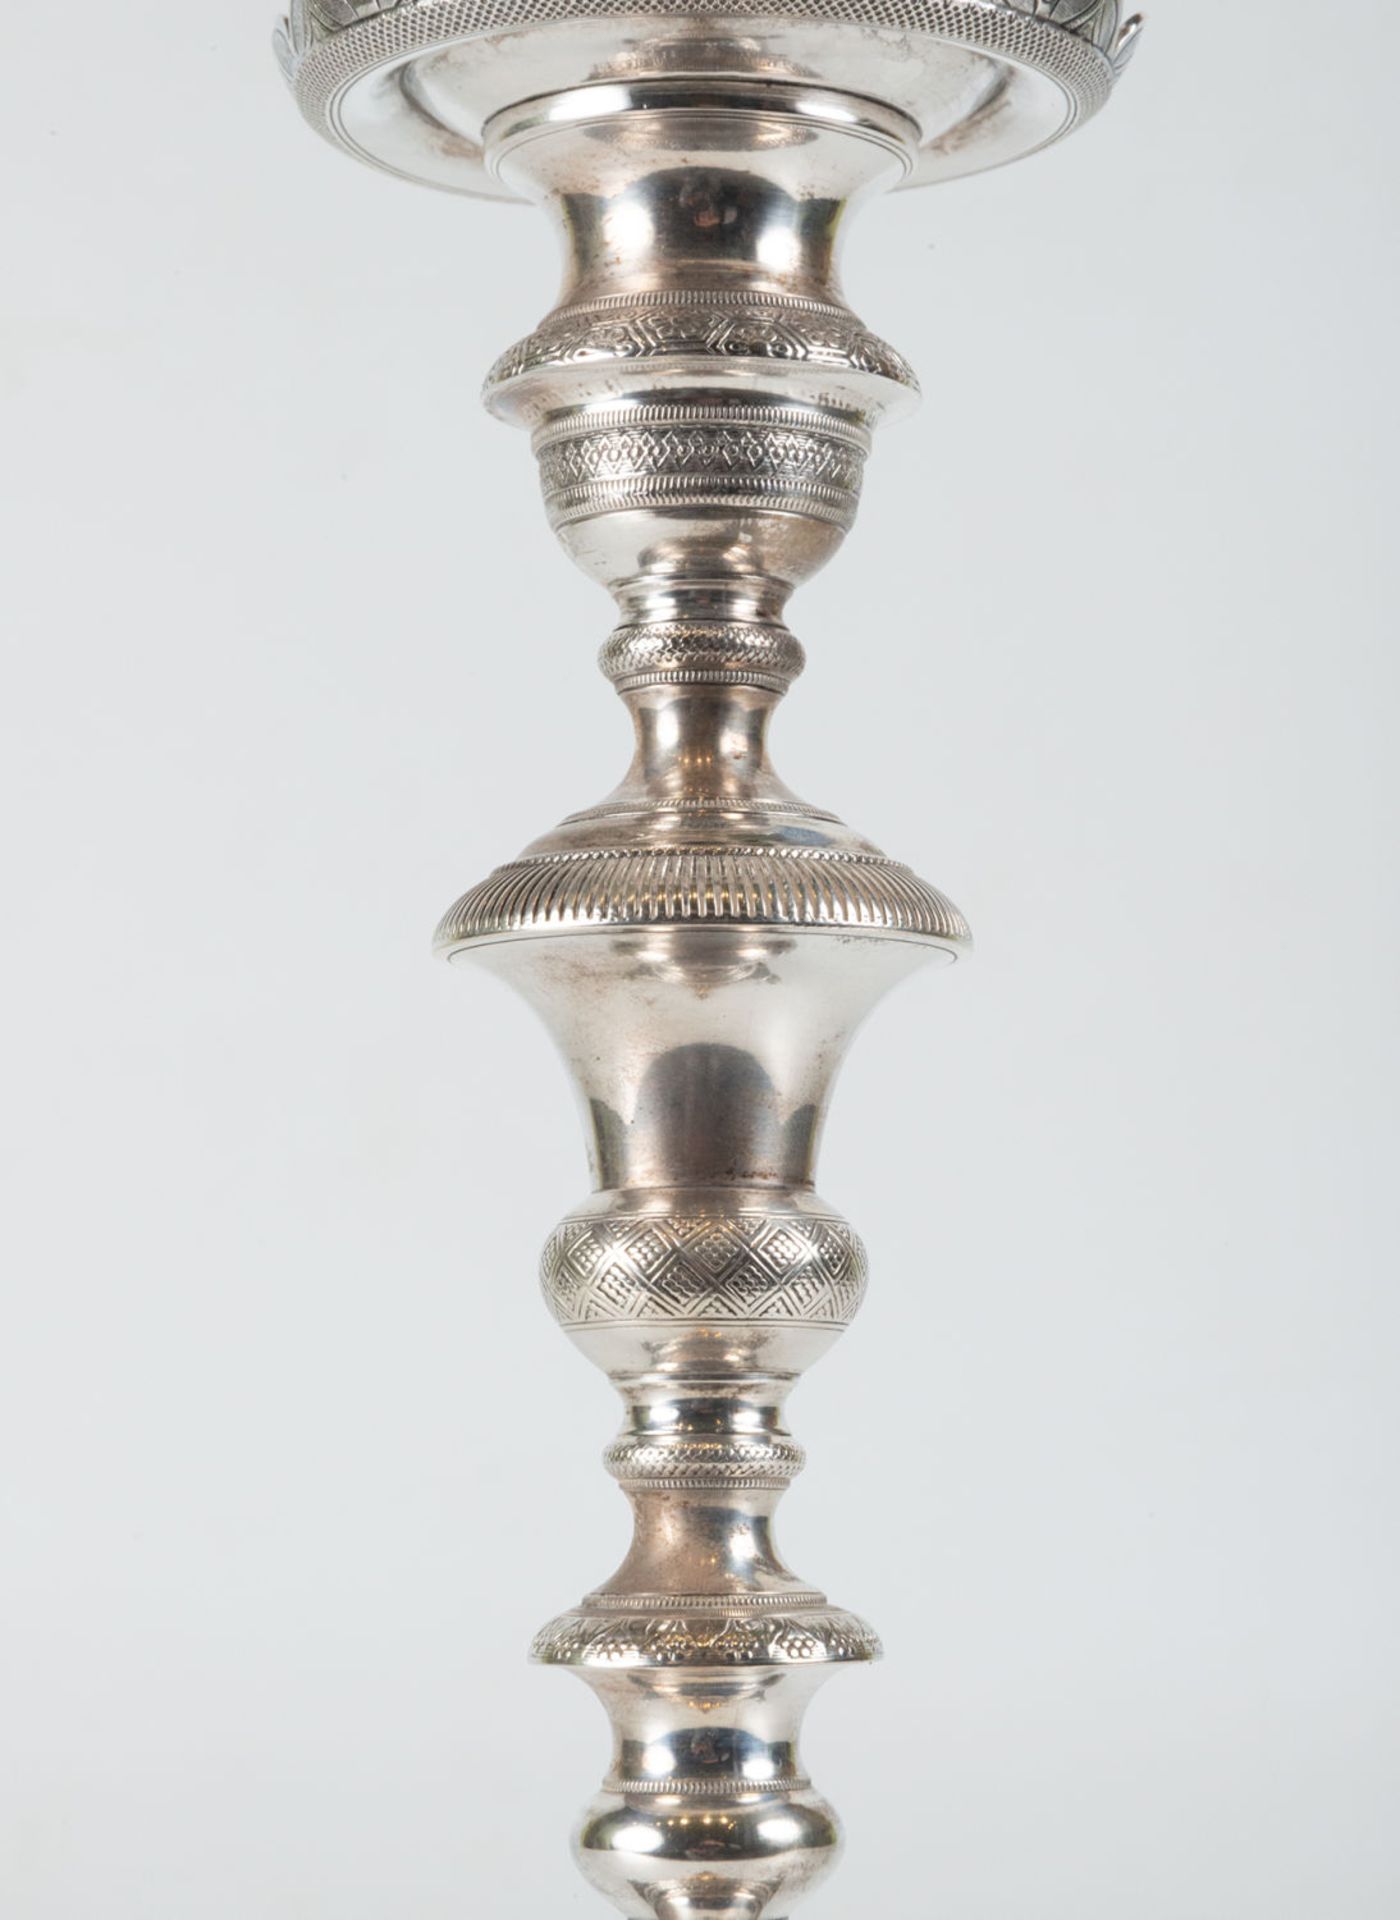 Pair of solid sterling silver candlesticks, 19th century - Image 7 of 9